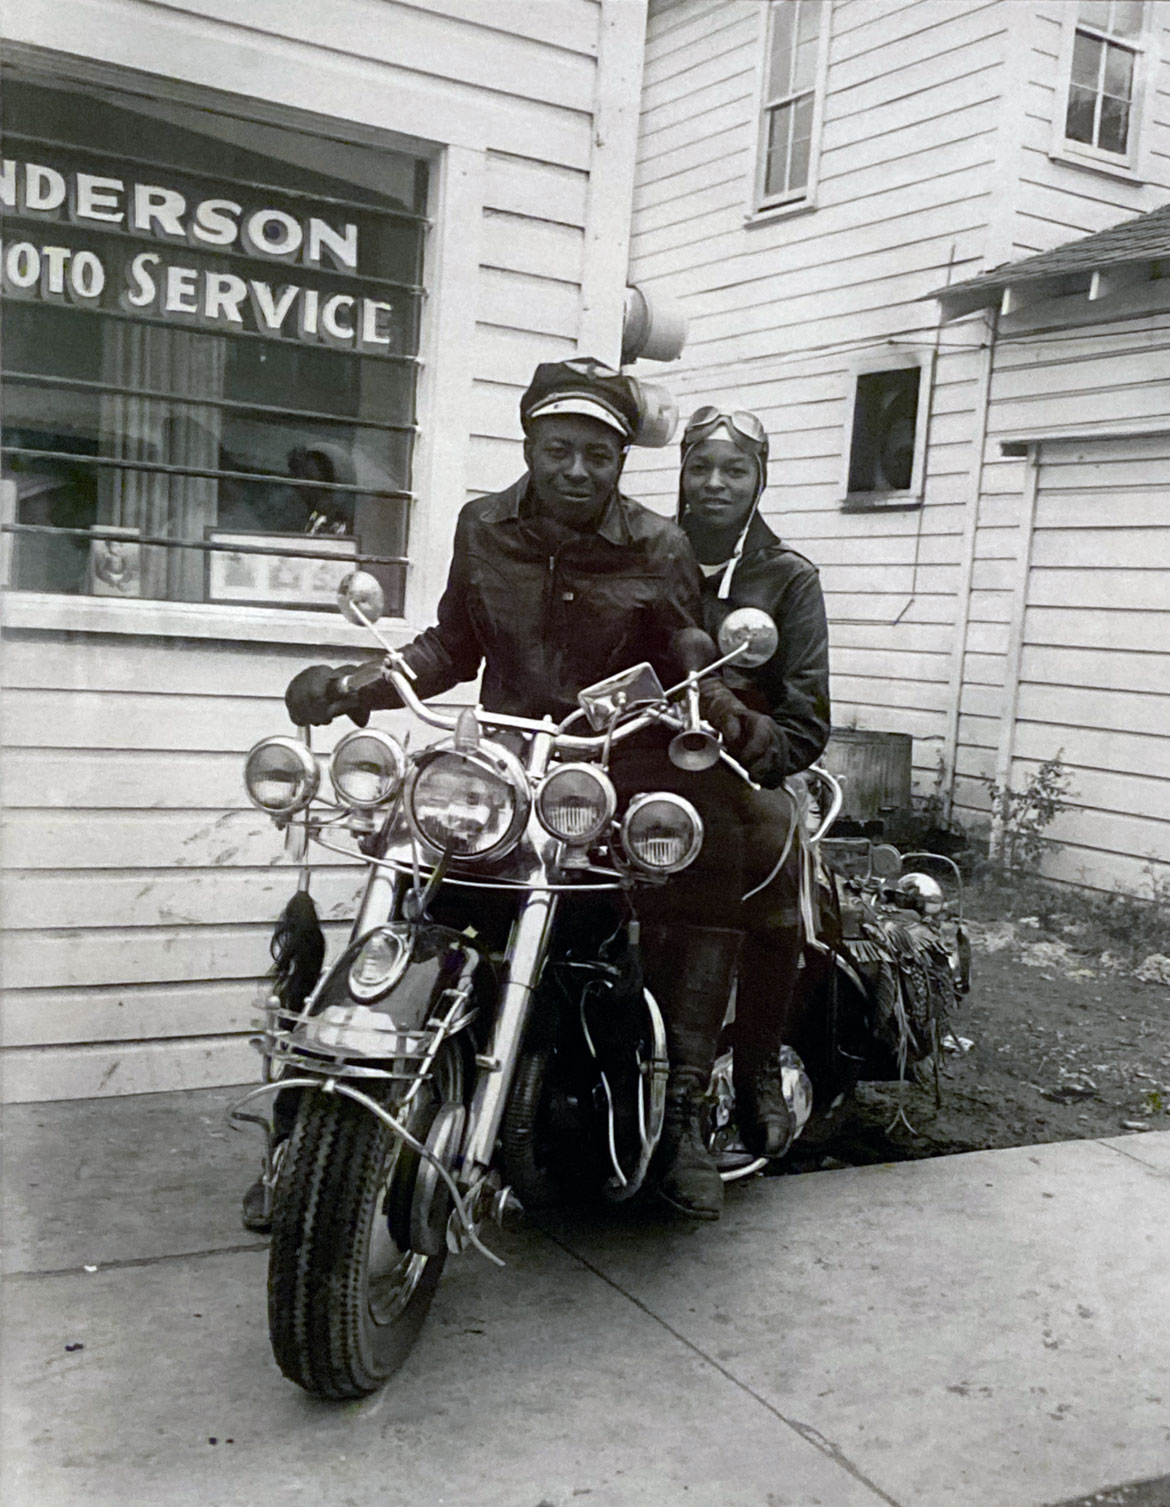 Henry Clay Anderson, "Portrait of a couple on a motorcycle outside of Anderson Photo Service Studio," about 1960.